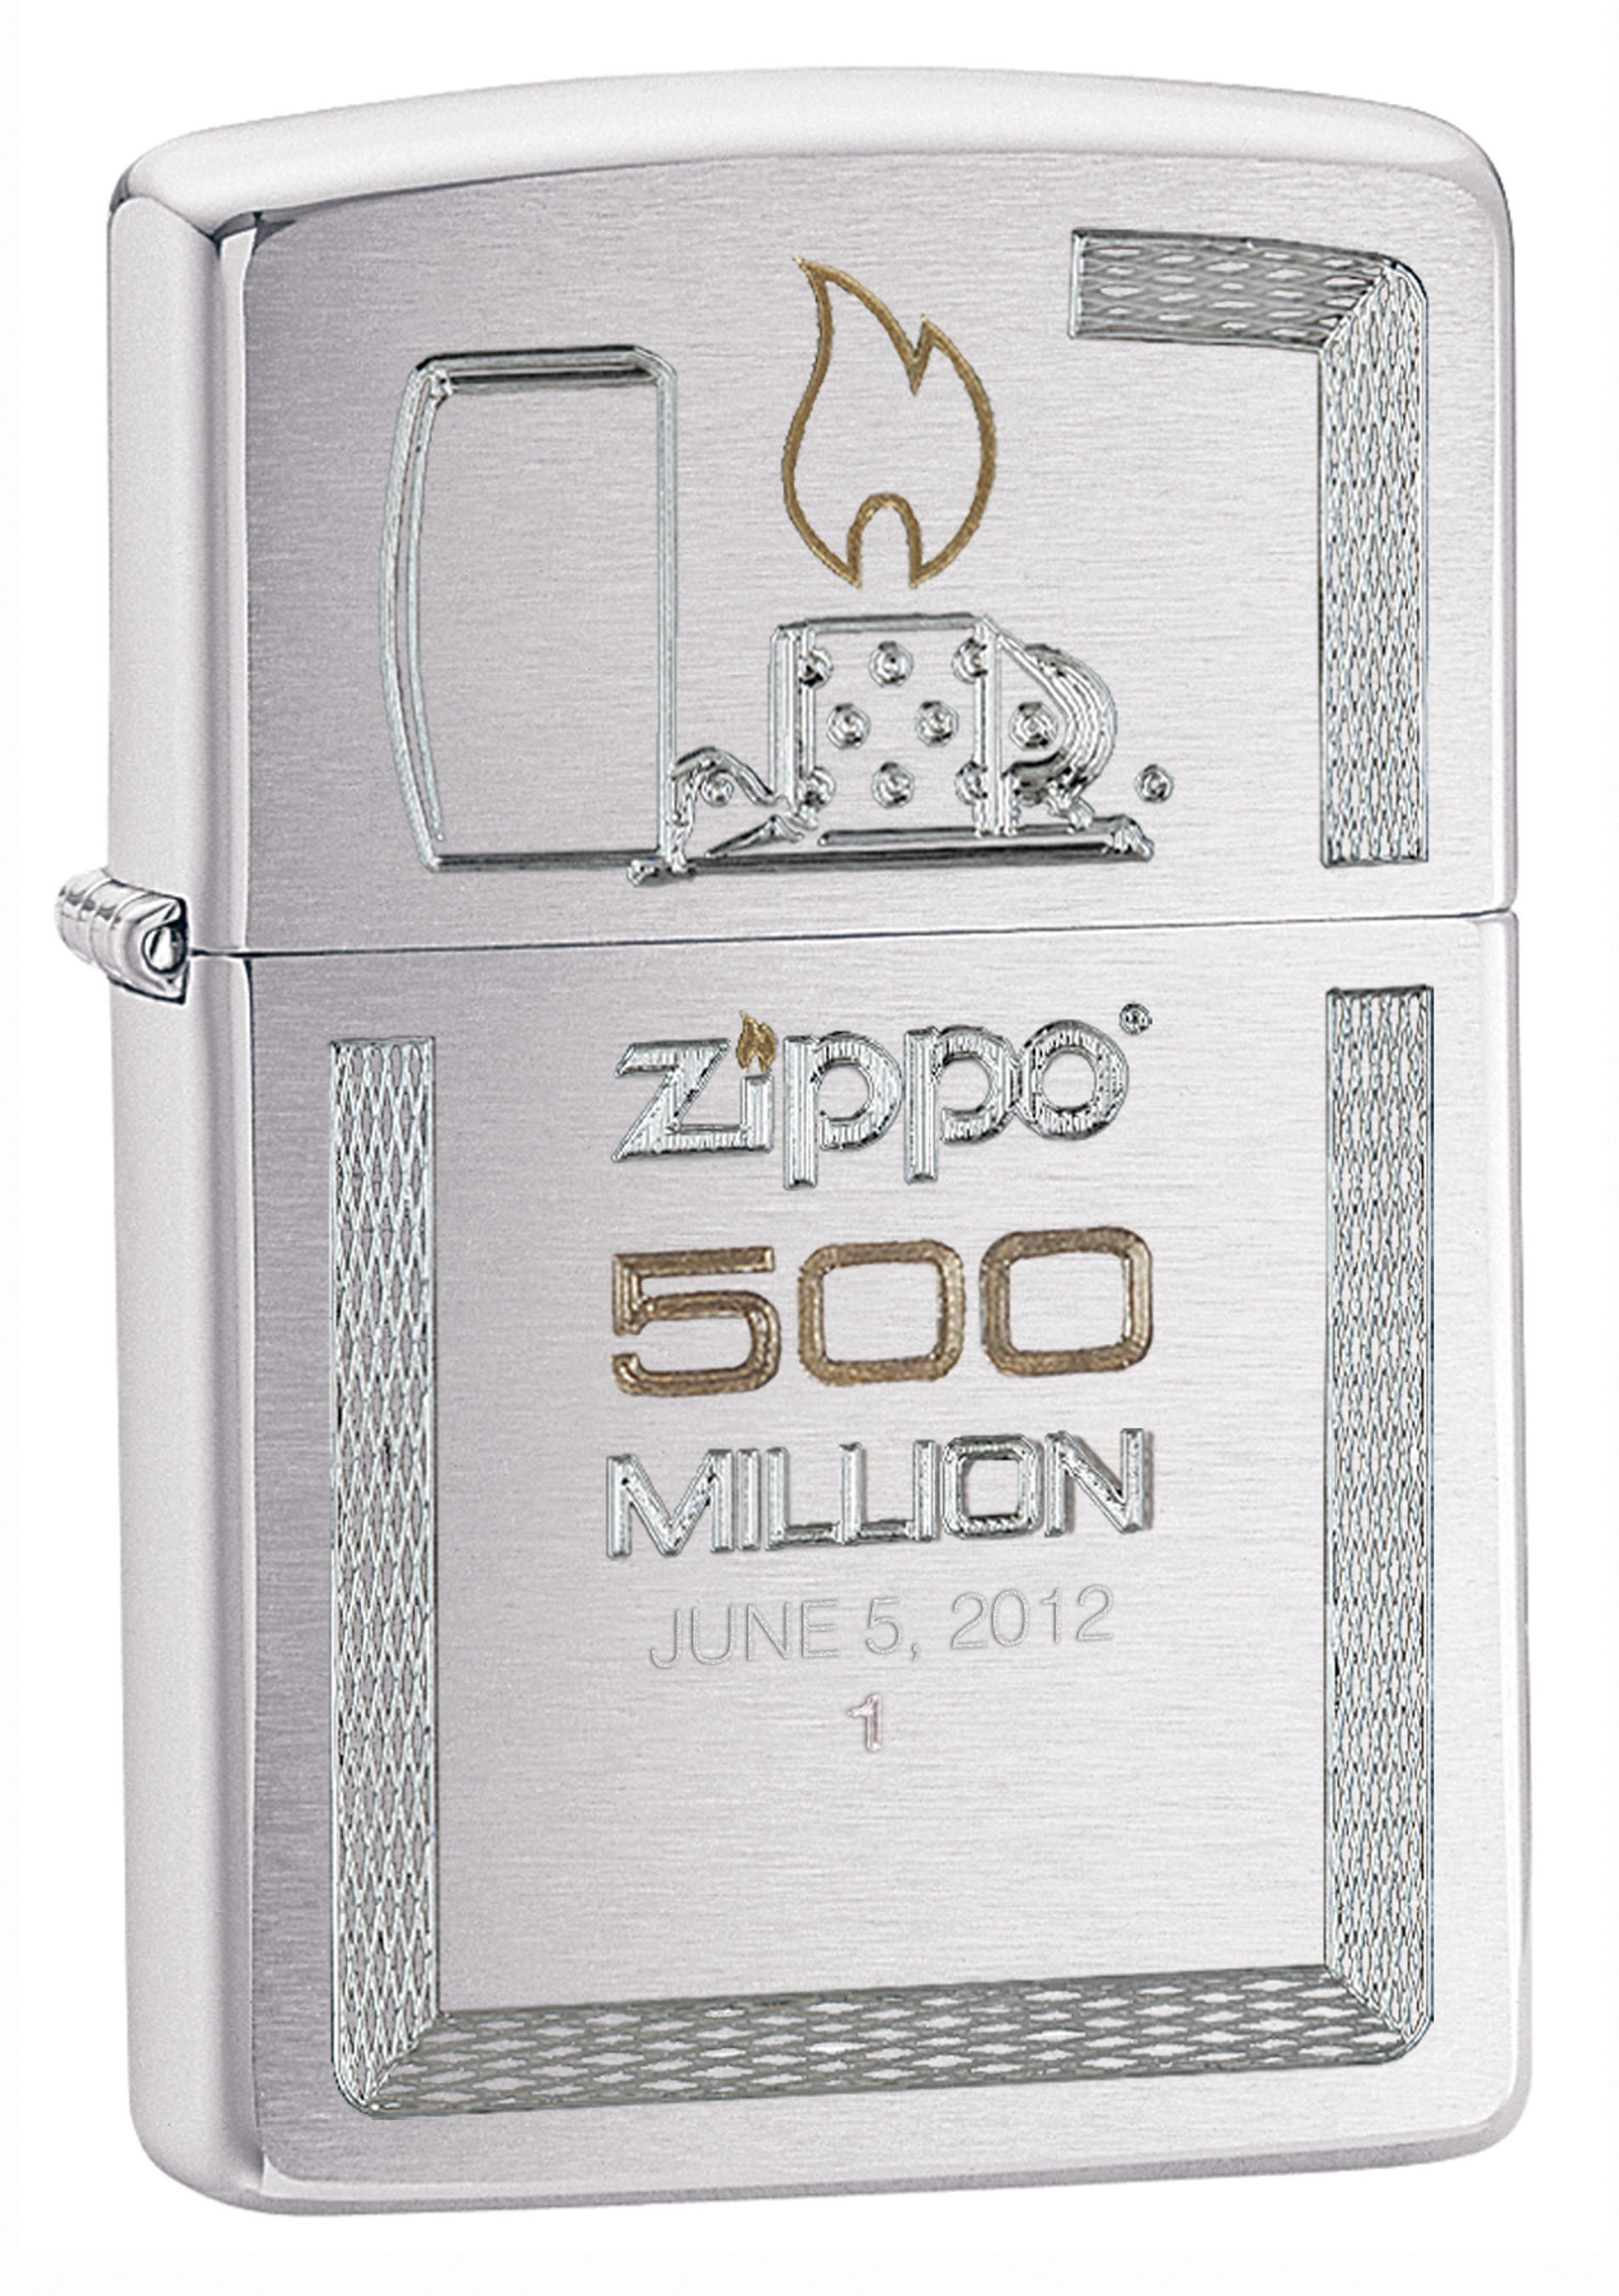 Zippo Announces Date For Production of 500 Millionth Lighter